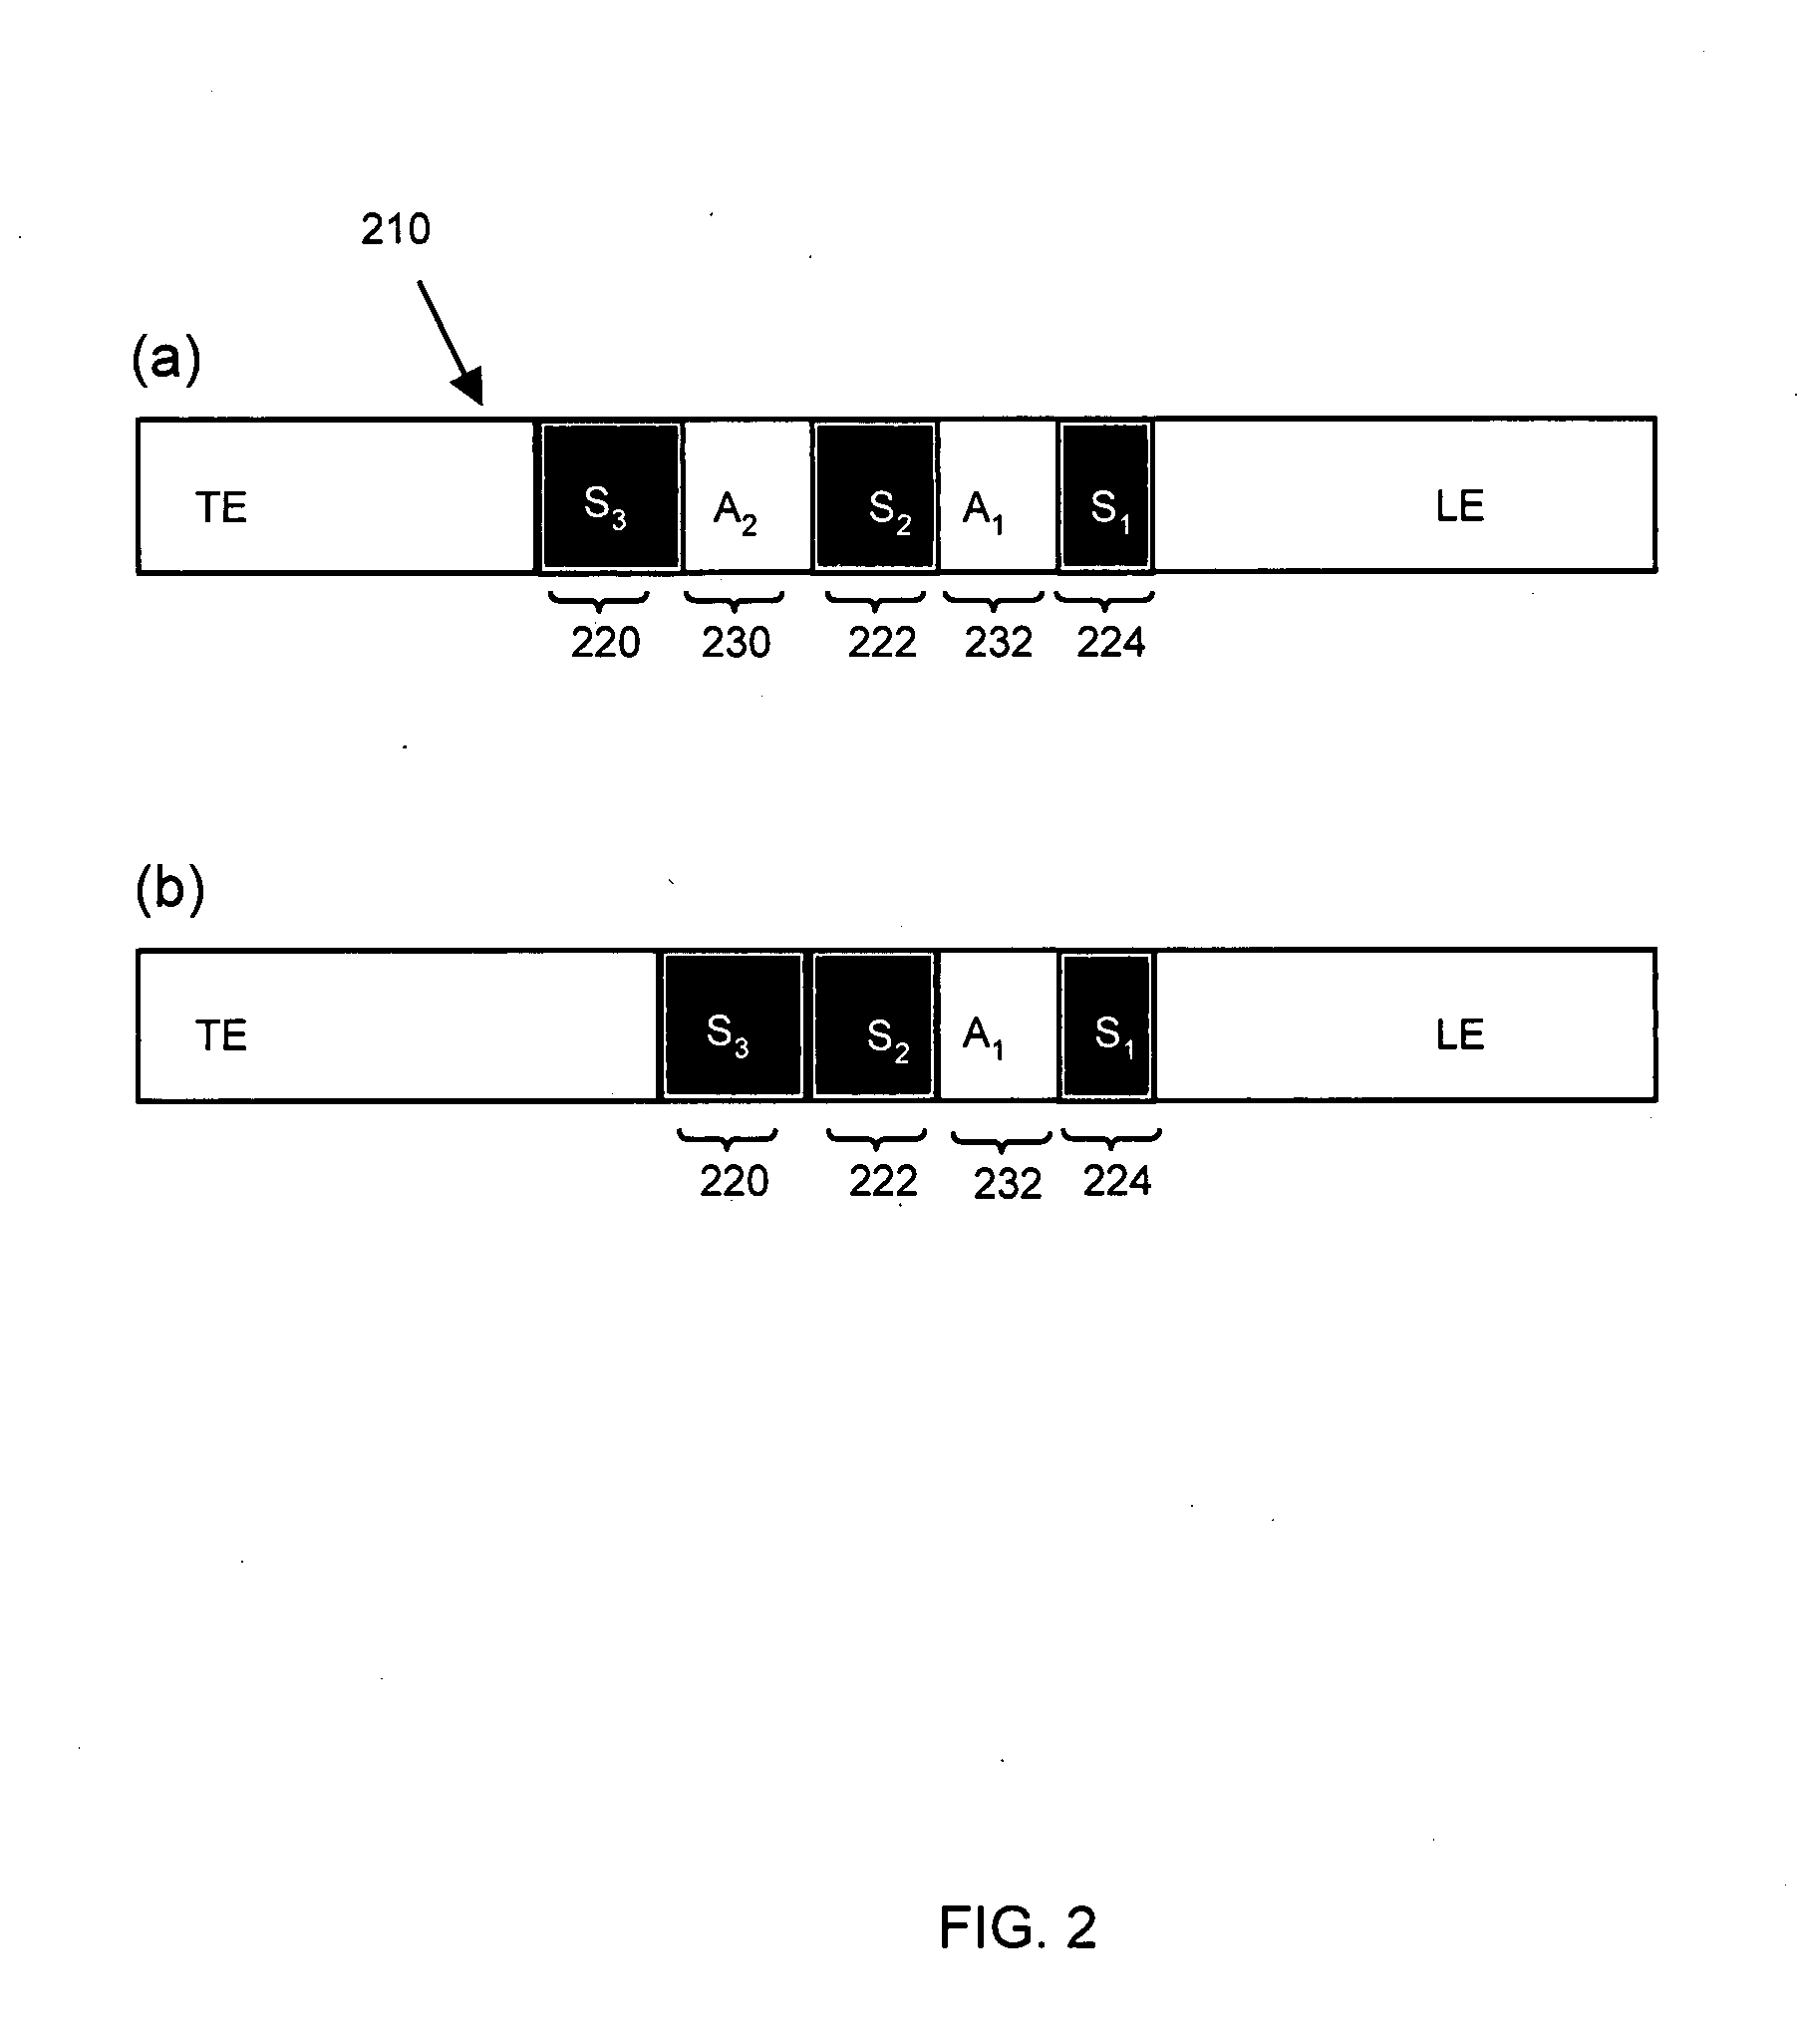 Method of detecting directly undetecable analytes using directly detectable spacer molecules